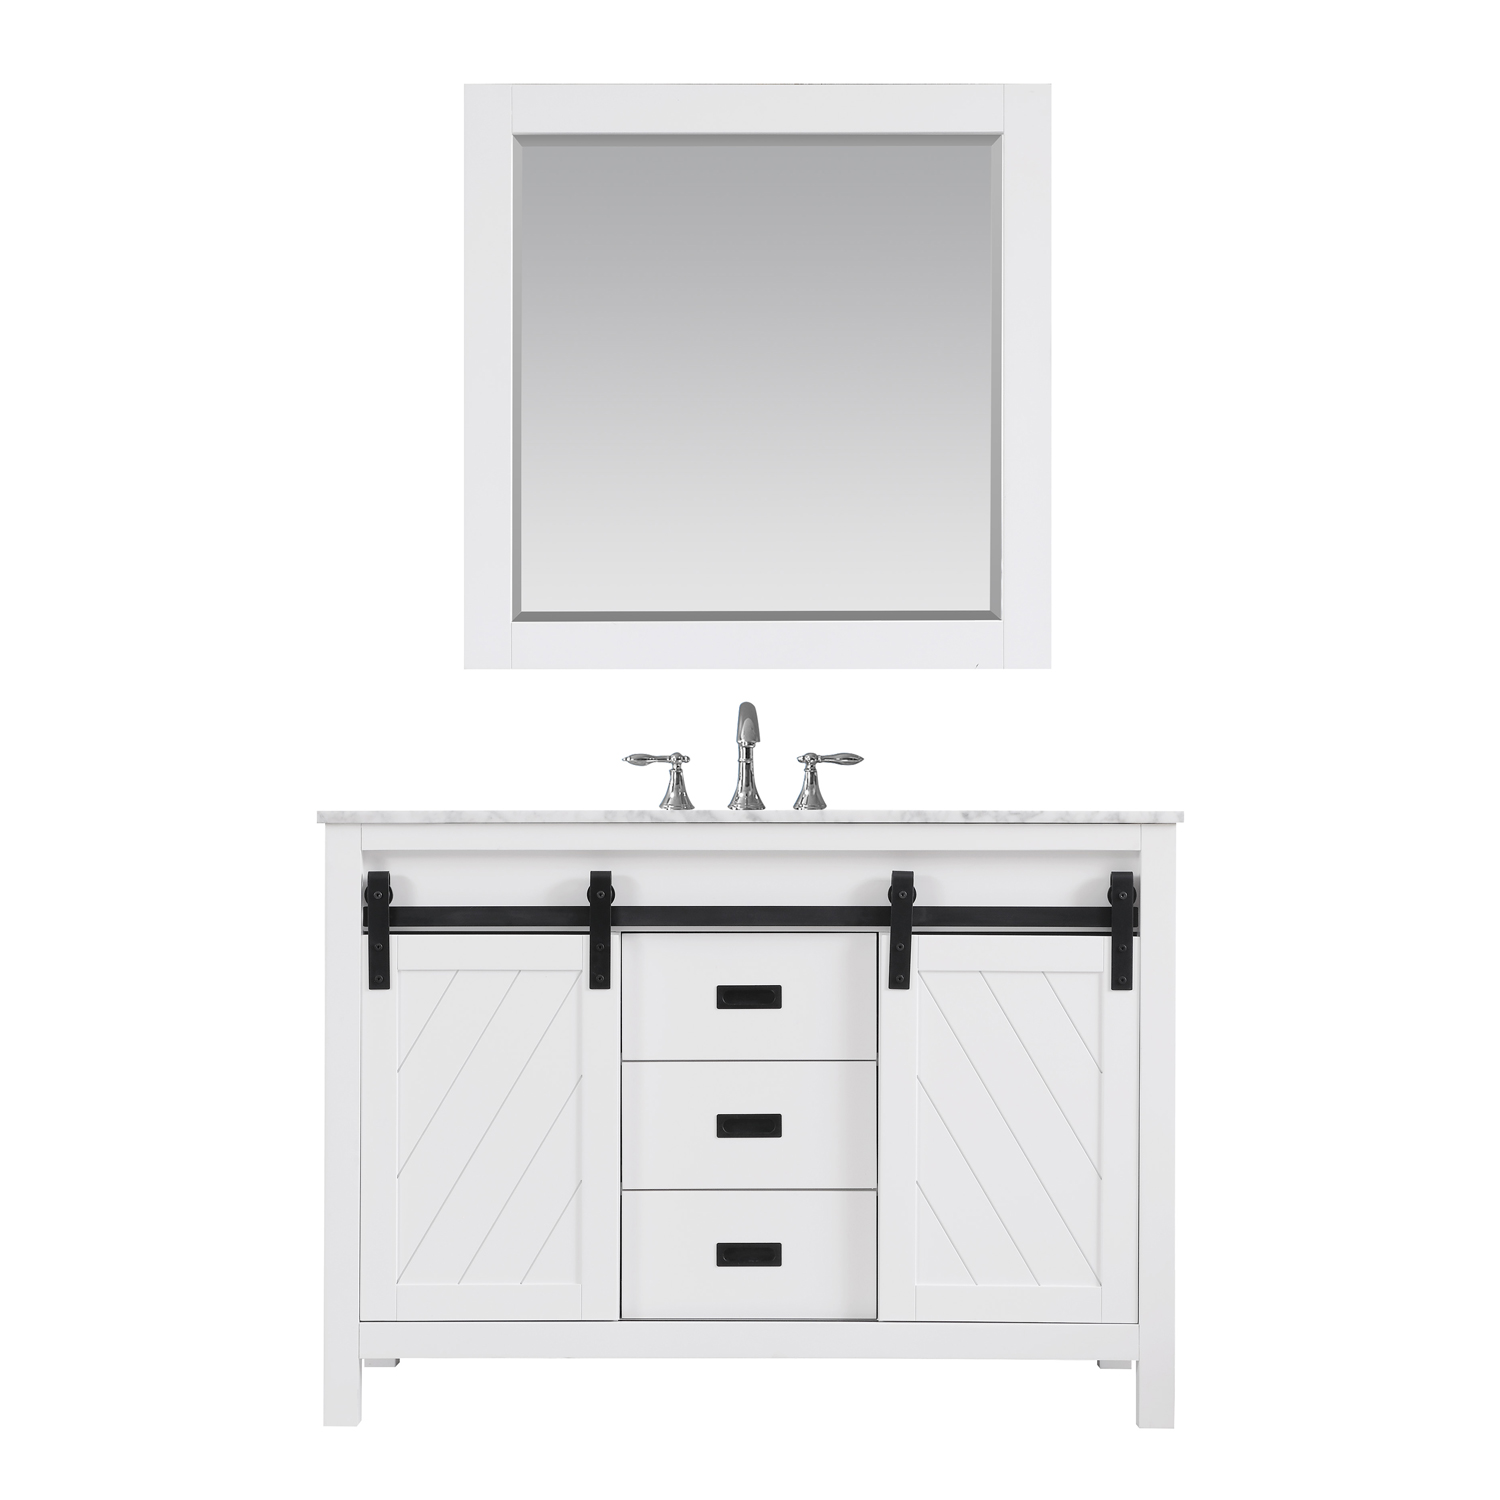 Issac Edwards Collection 48" Single Bathroom Vanity Set in White and Carrara White Marble Countertop without Mirror 